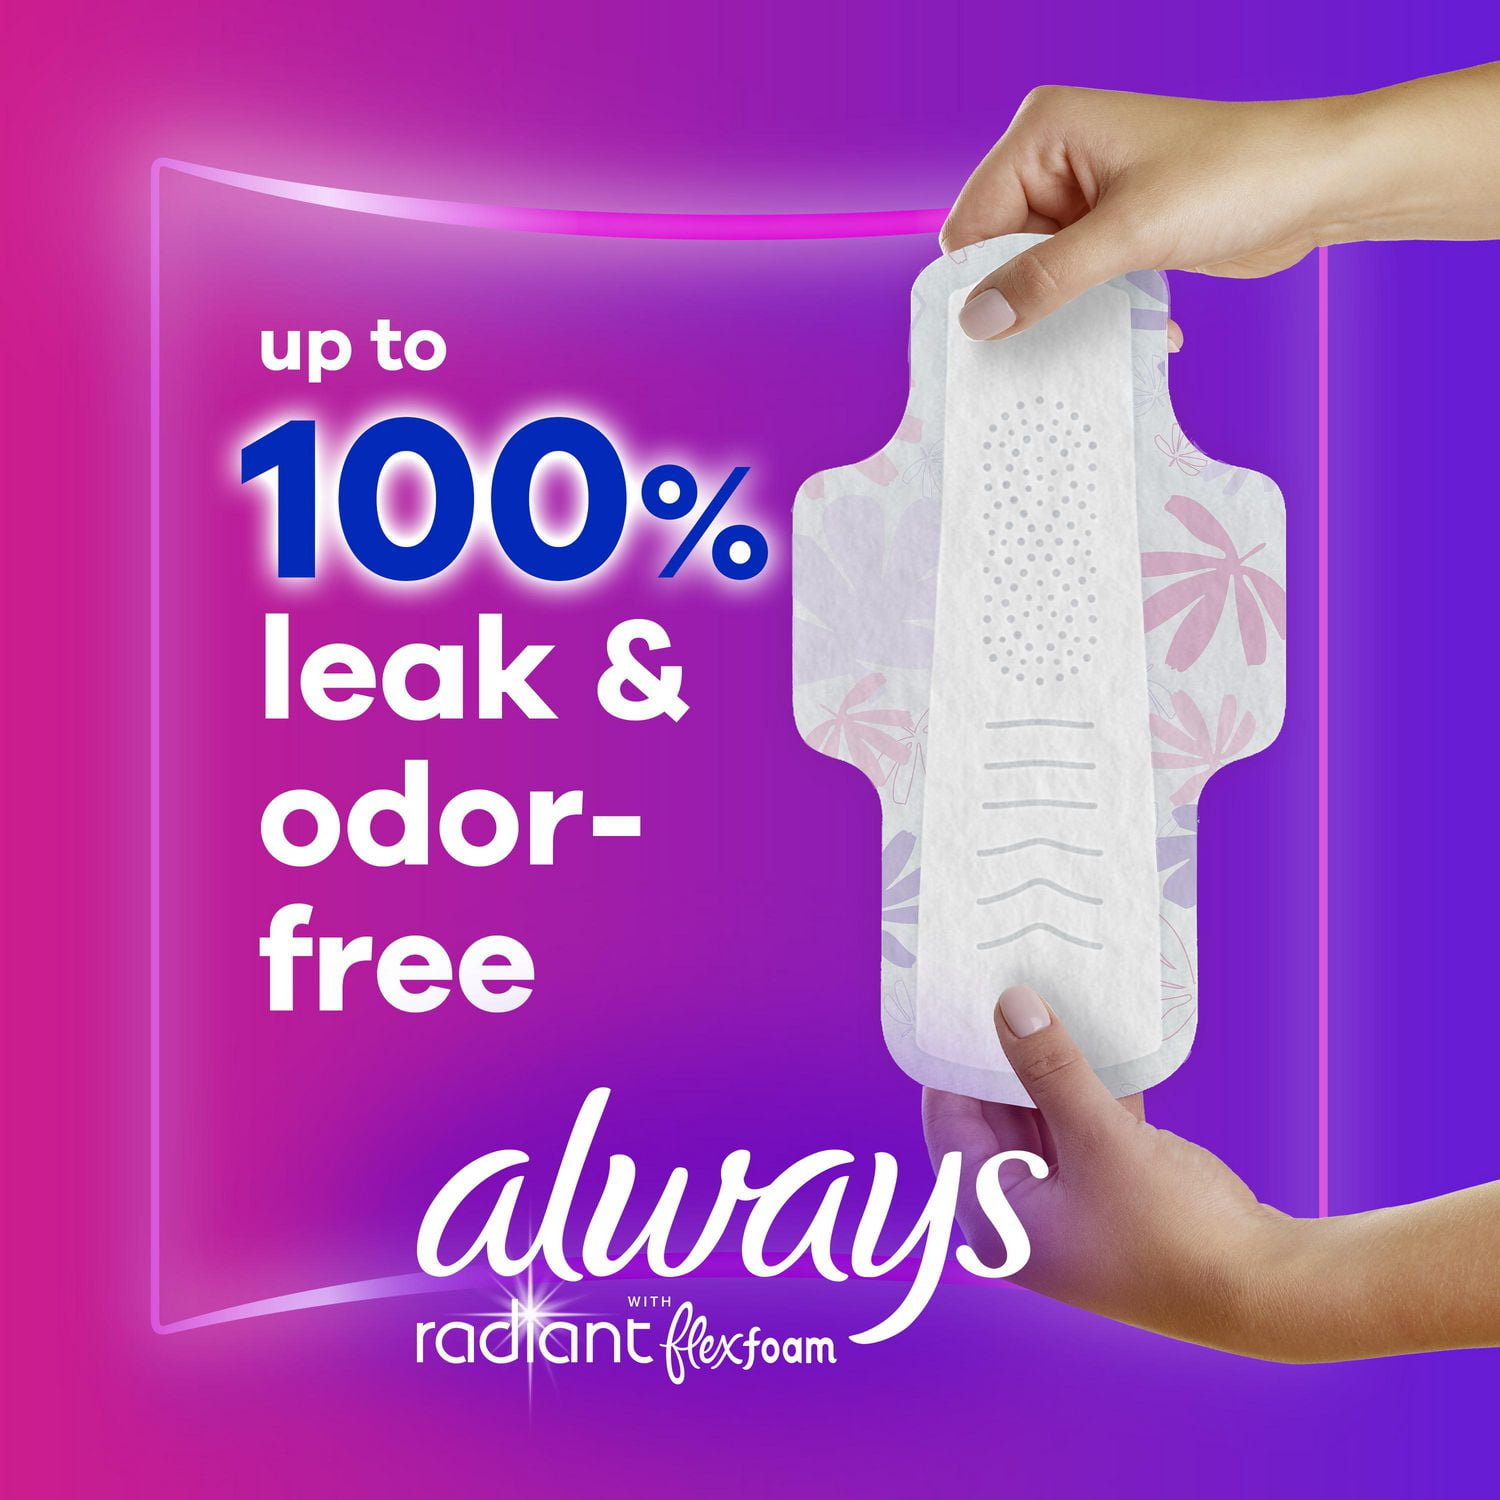 Always Radiant FlexFoam Pads for Women Size 2, Heavy Flow Absorbency, 100%  Leak & Odor Free Protection is possible, with Wings, Scented, 36 Count 